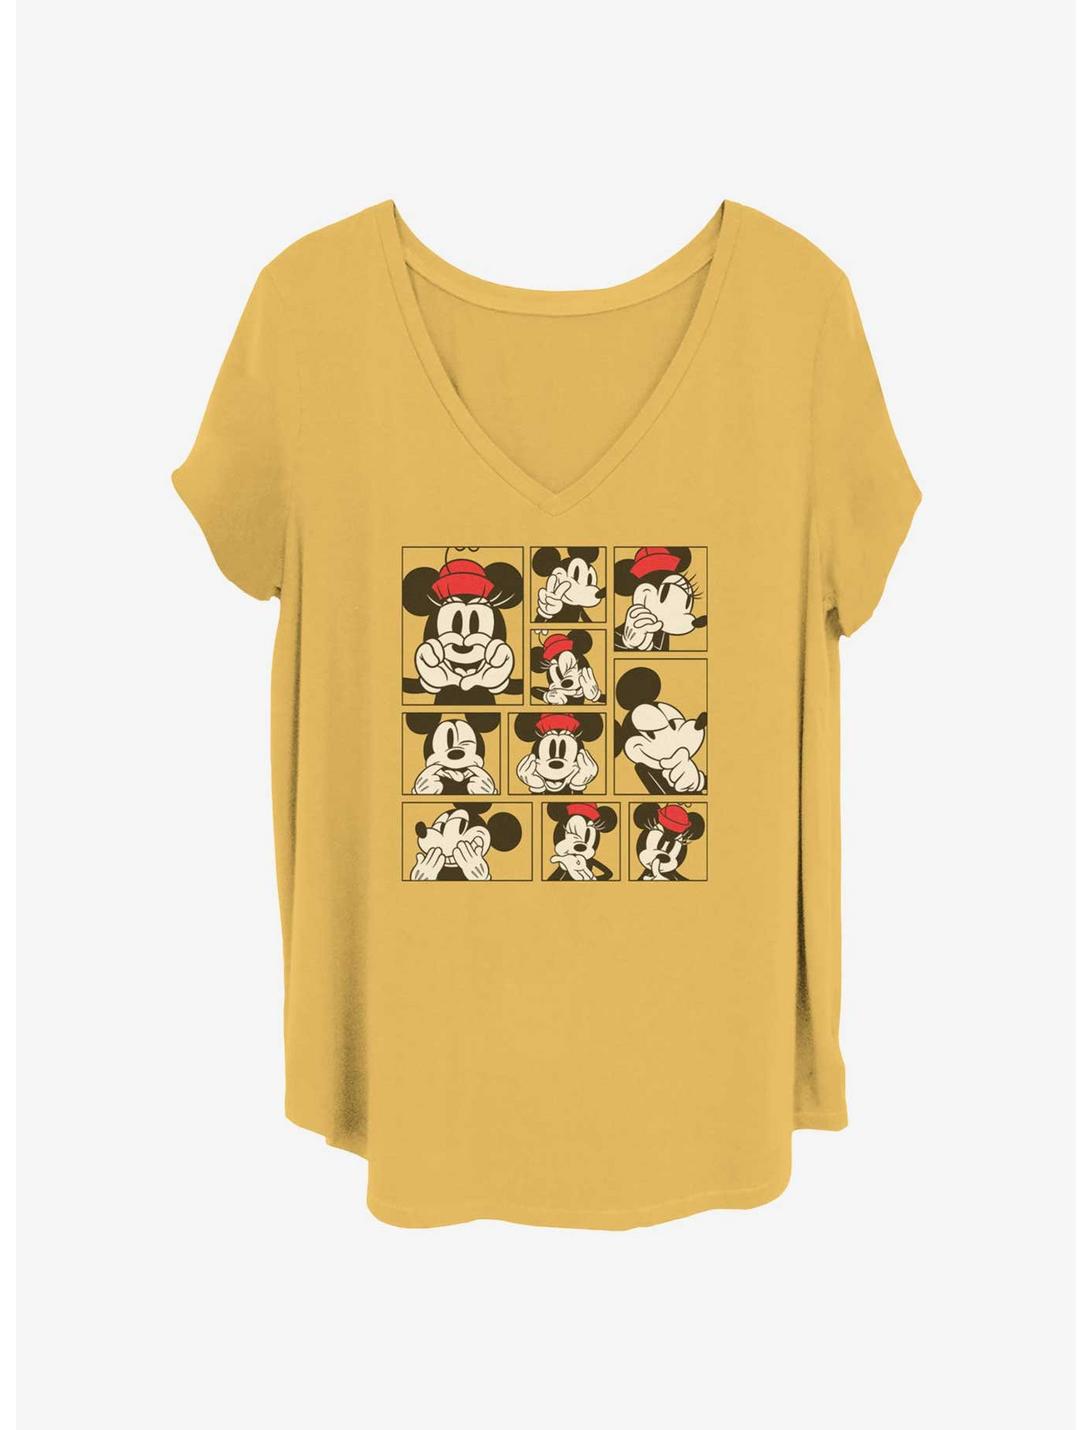 Disney Mickey Mouse & Minnie Mouse Grid Girls T-Shirt Plus Size, OCHRE, hi-res